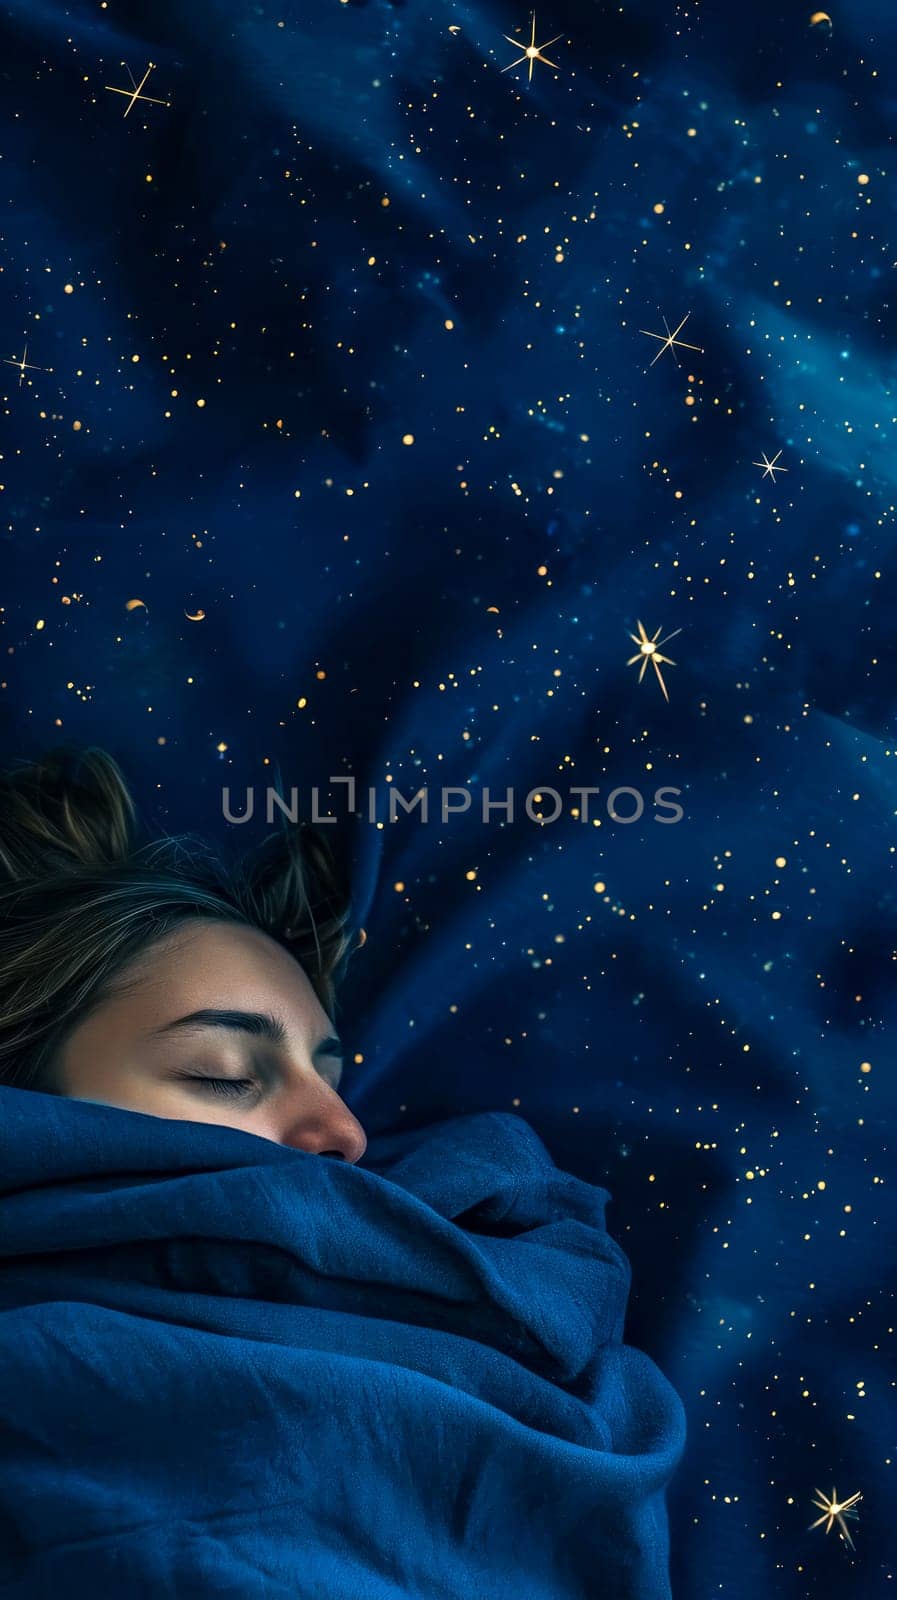 young woman sleeping comfortably under a blue blanket, passing through a star-studded night sky, giving the impression of being enveloped in space, vertical, copy space